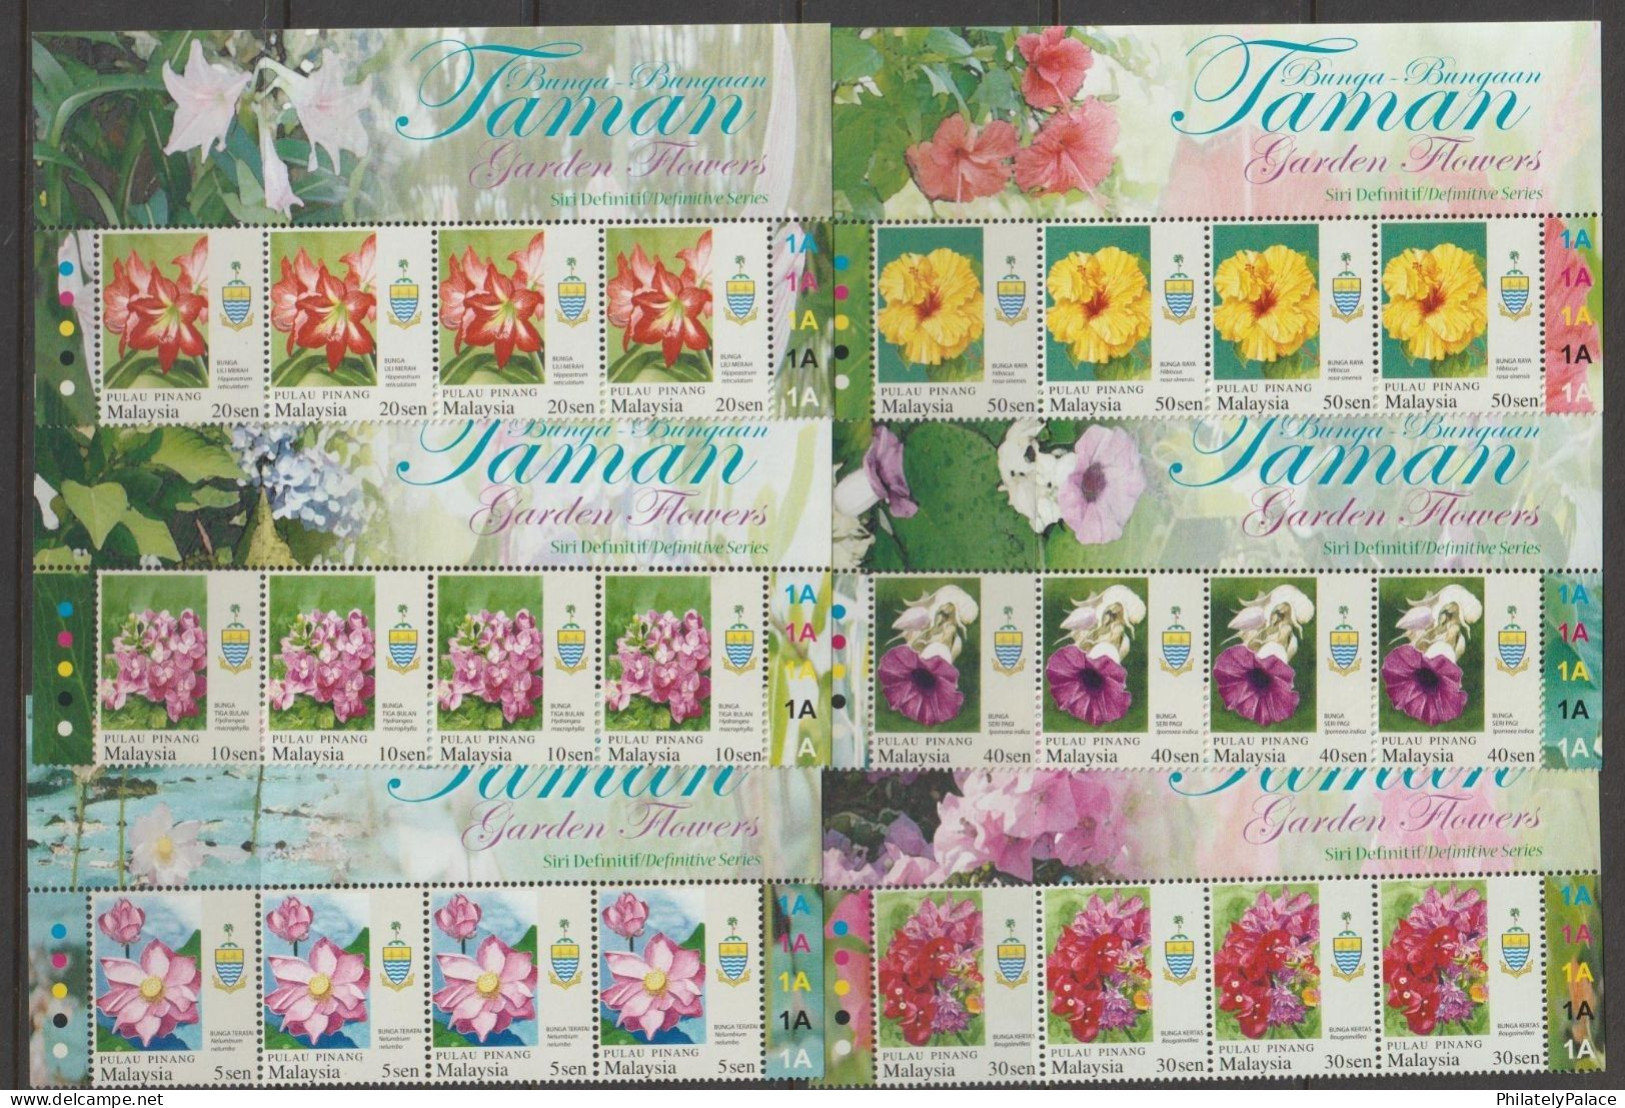 MALAYSIA 2007 Garden Flowers Definitve Sheets,Flora, 7 Different Places, Sheets MNH (**)